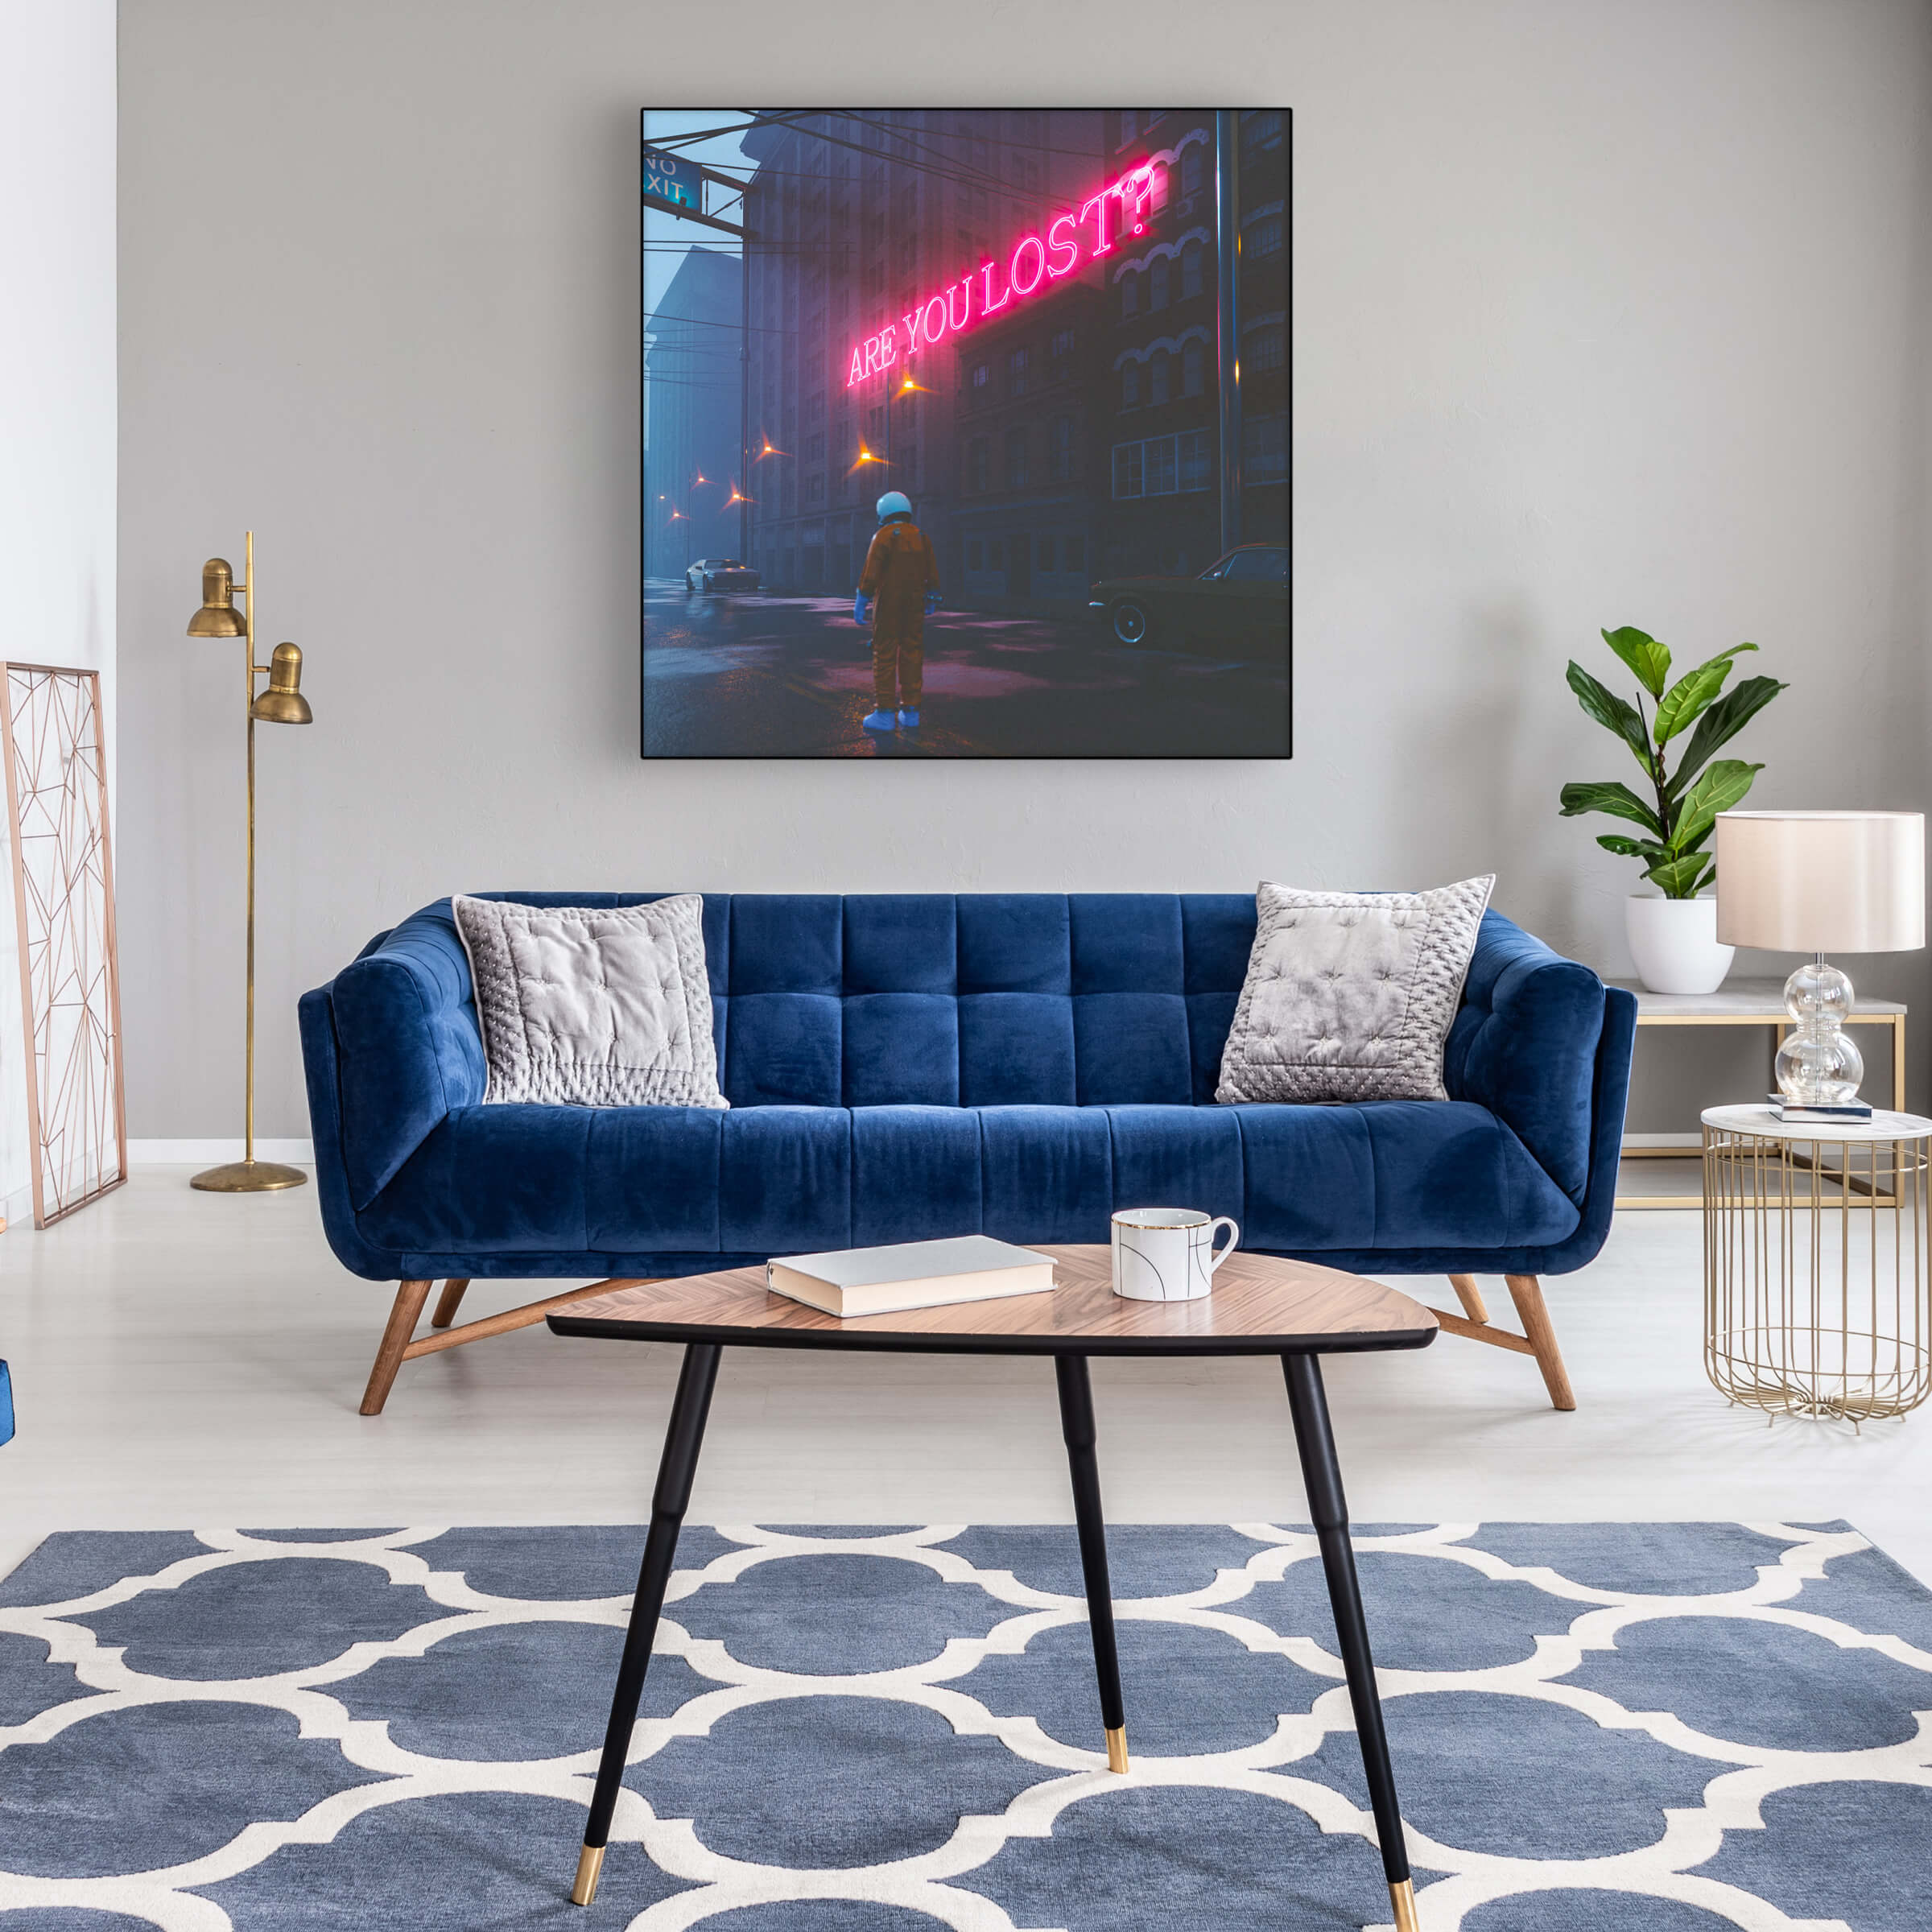 Large square surreal astronaut wall art with pink neon sign that reads "are you lost?" hangs above blue couch in living room